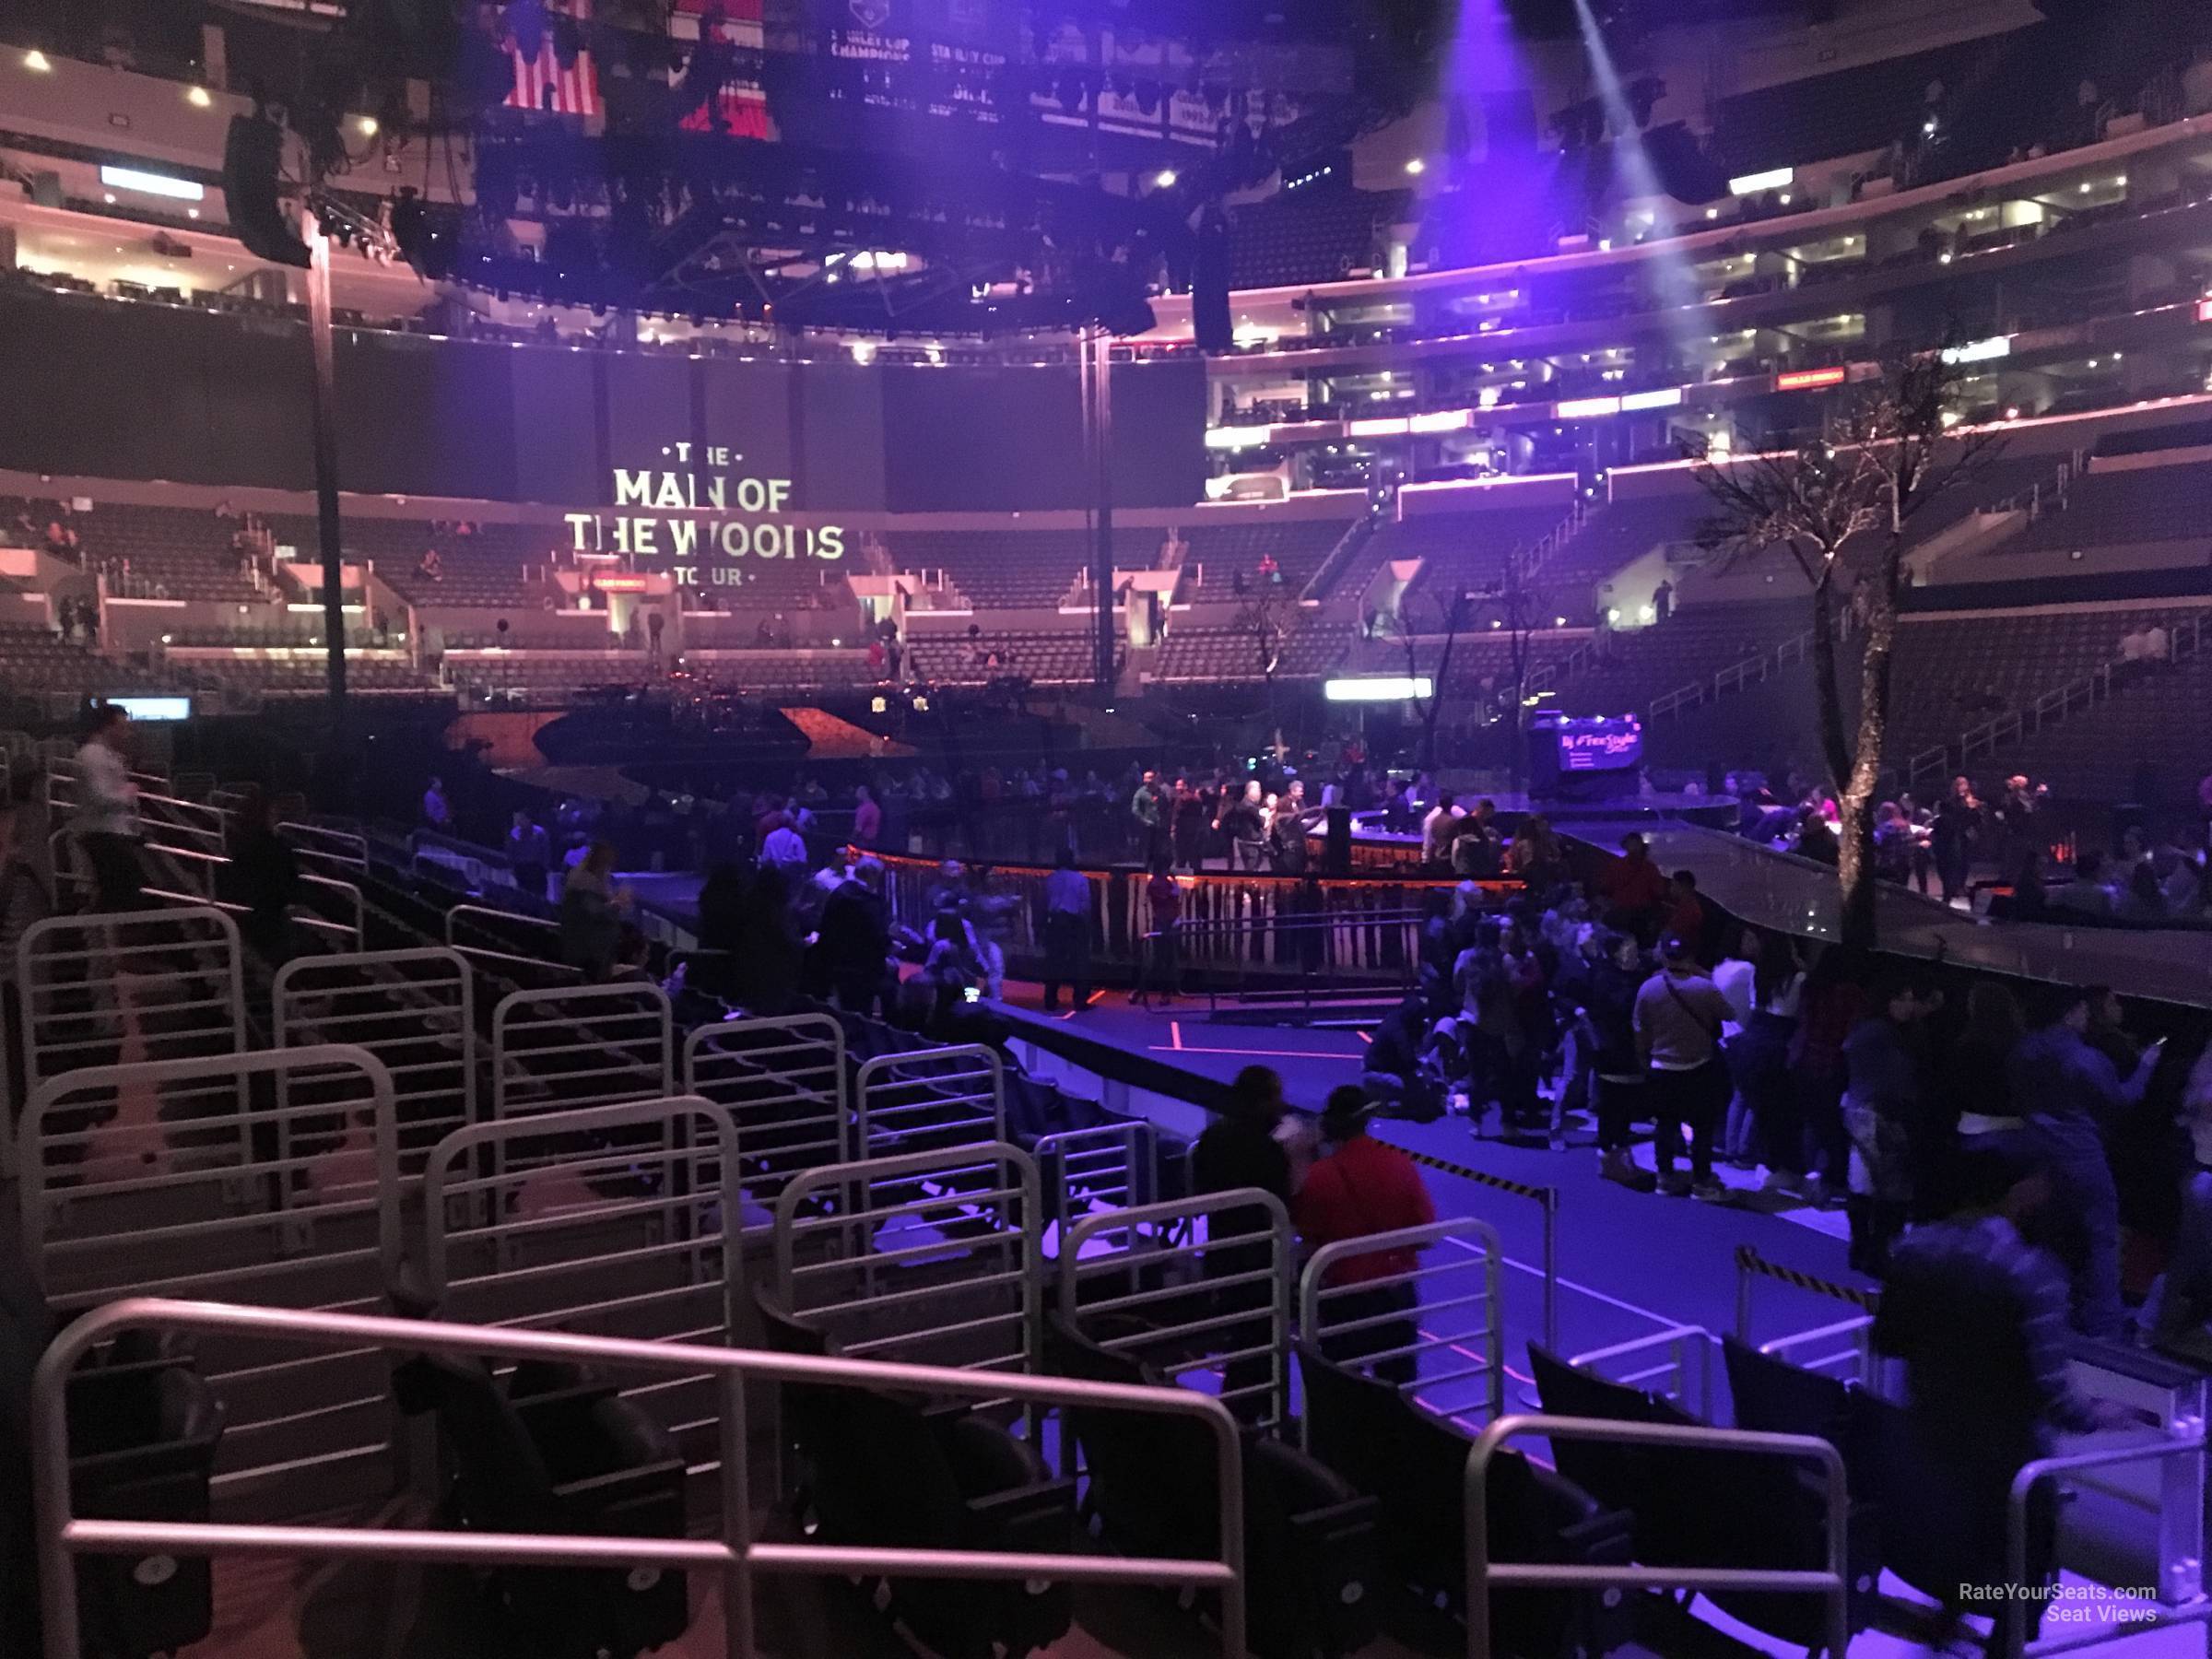 section 110, row 5 seat view  for concert - crypto.com arena